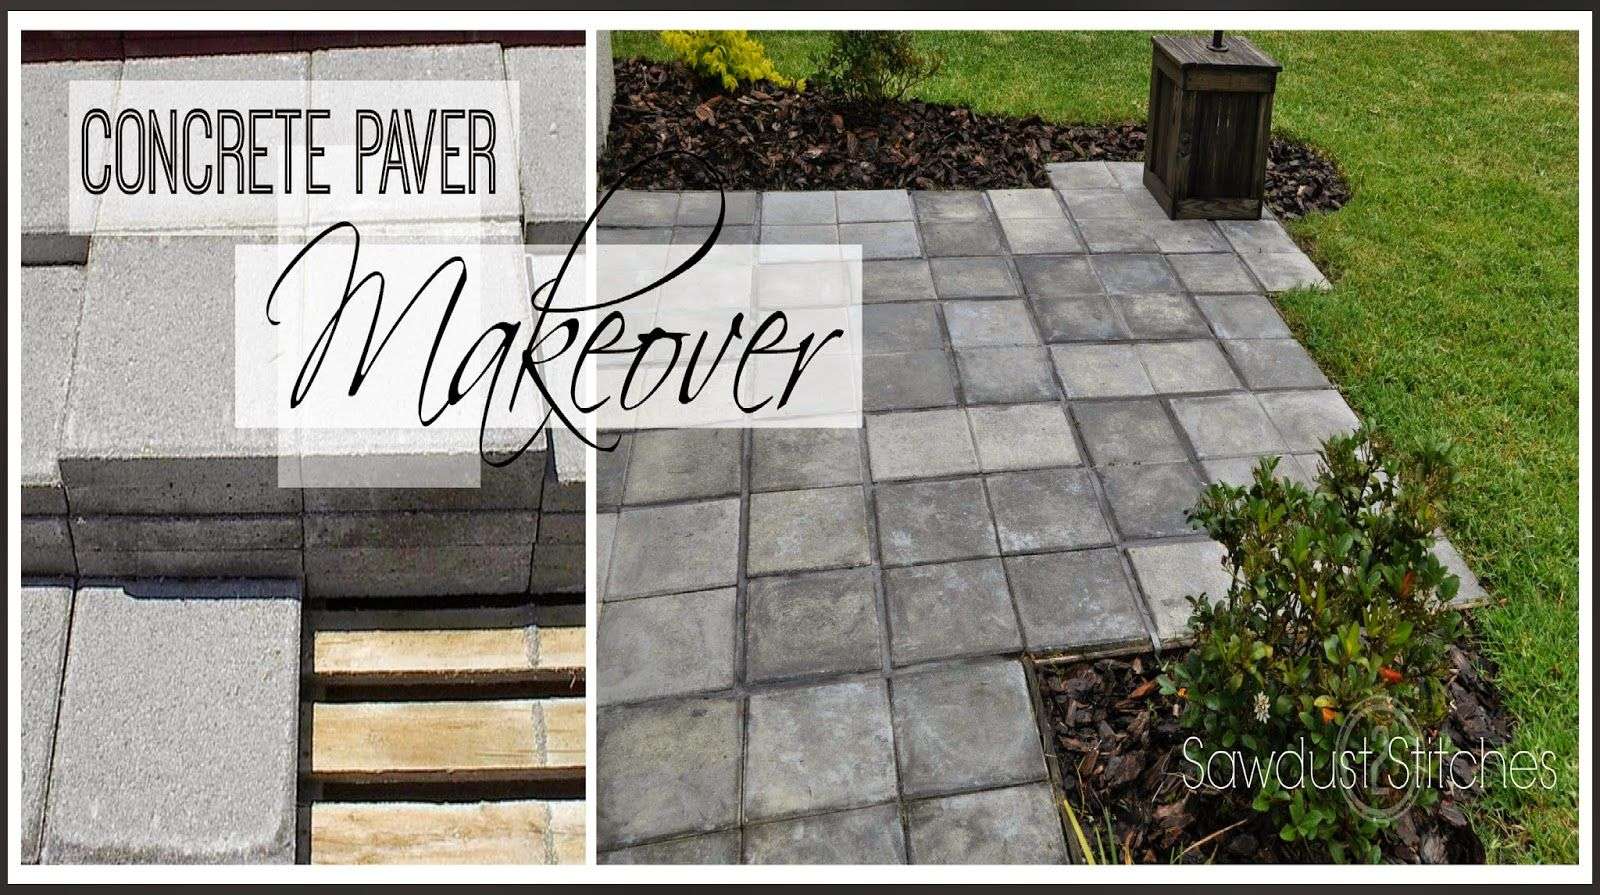 Sawdust 2 Stitches: Paver Patio Makeover